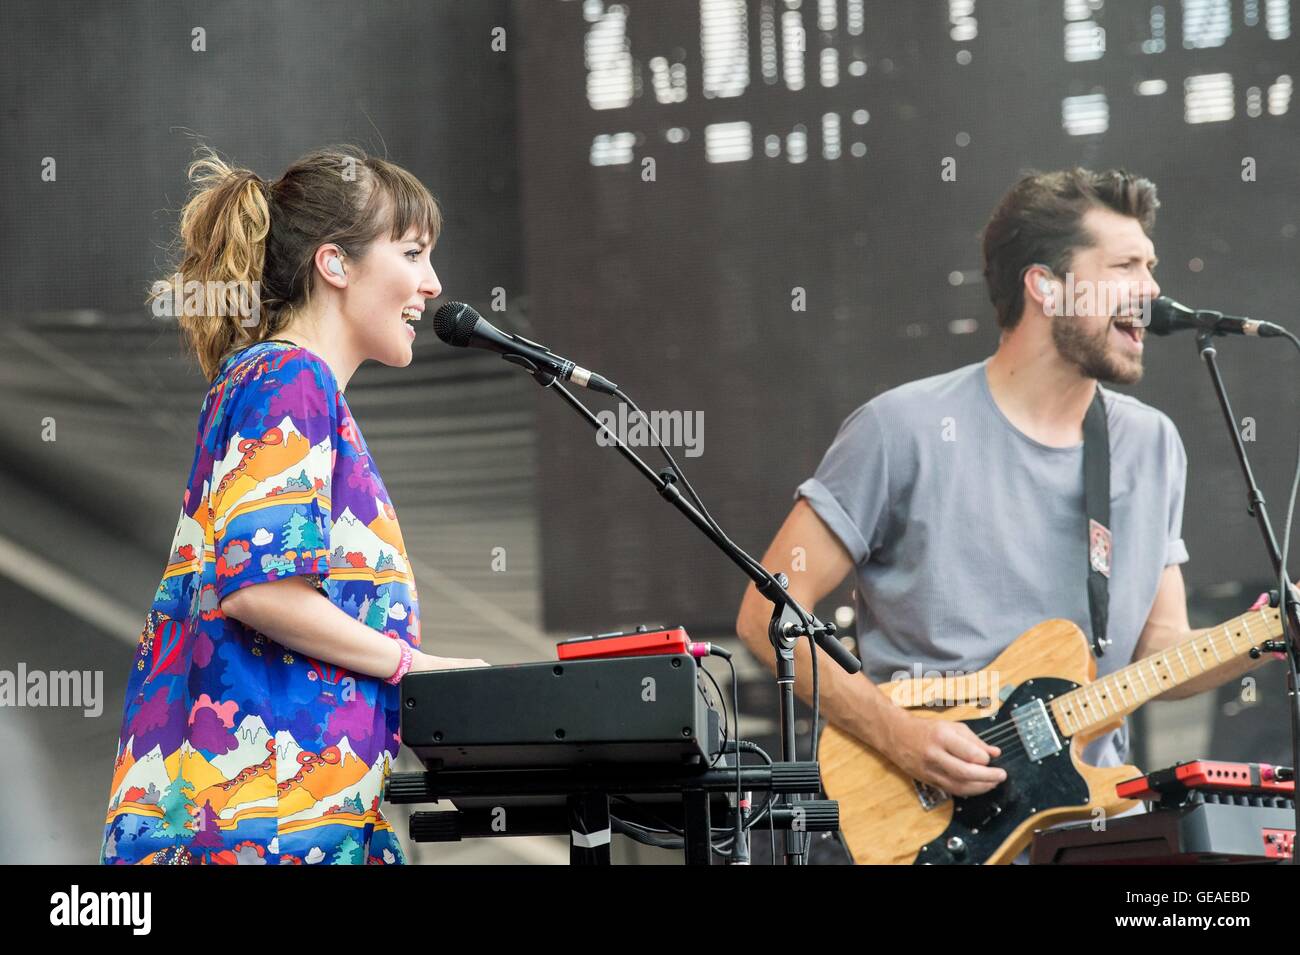 New York, NY, USA. 23rd July, 2016. Josephine Vander Gucht, Anthony West, Oh Wonder on stage for Panorama Festival Presented by Goldenvoice - SAT, Randall's Island Park, New York, NY July 23, 2016. © Steven Ferdman/Everett Collection/Alamy Live News Stock Photo